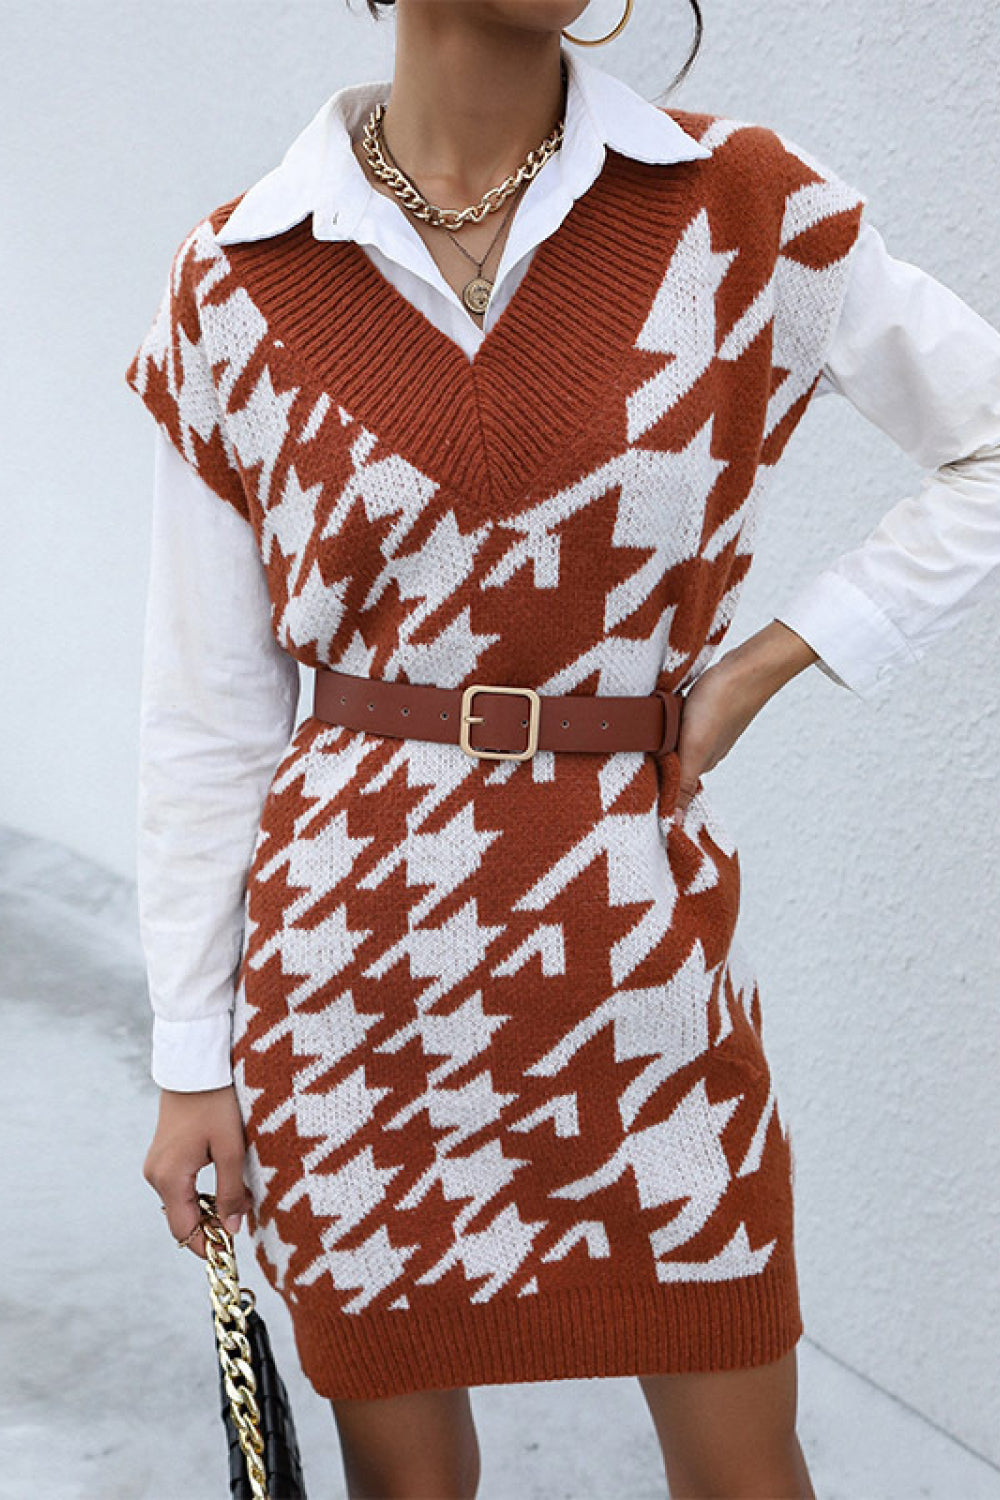 Large Scale Houndstooth Sweater Vest Dress